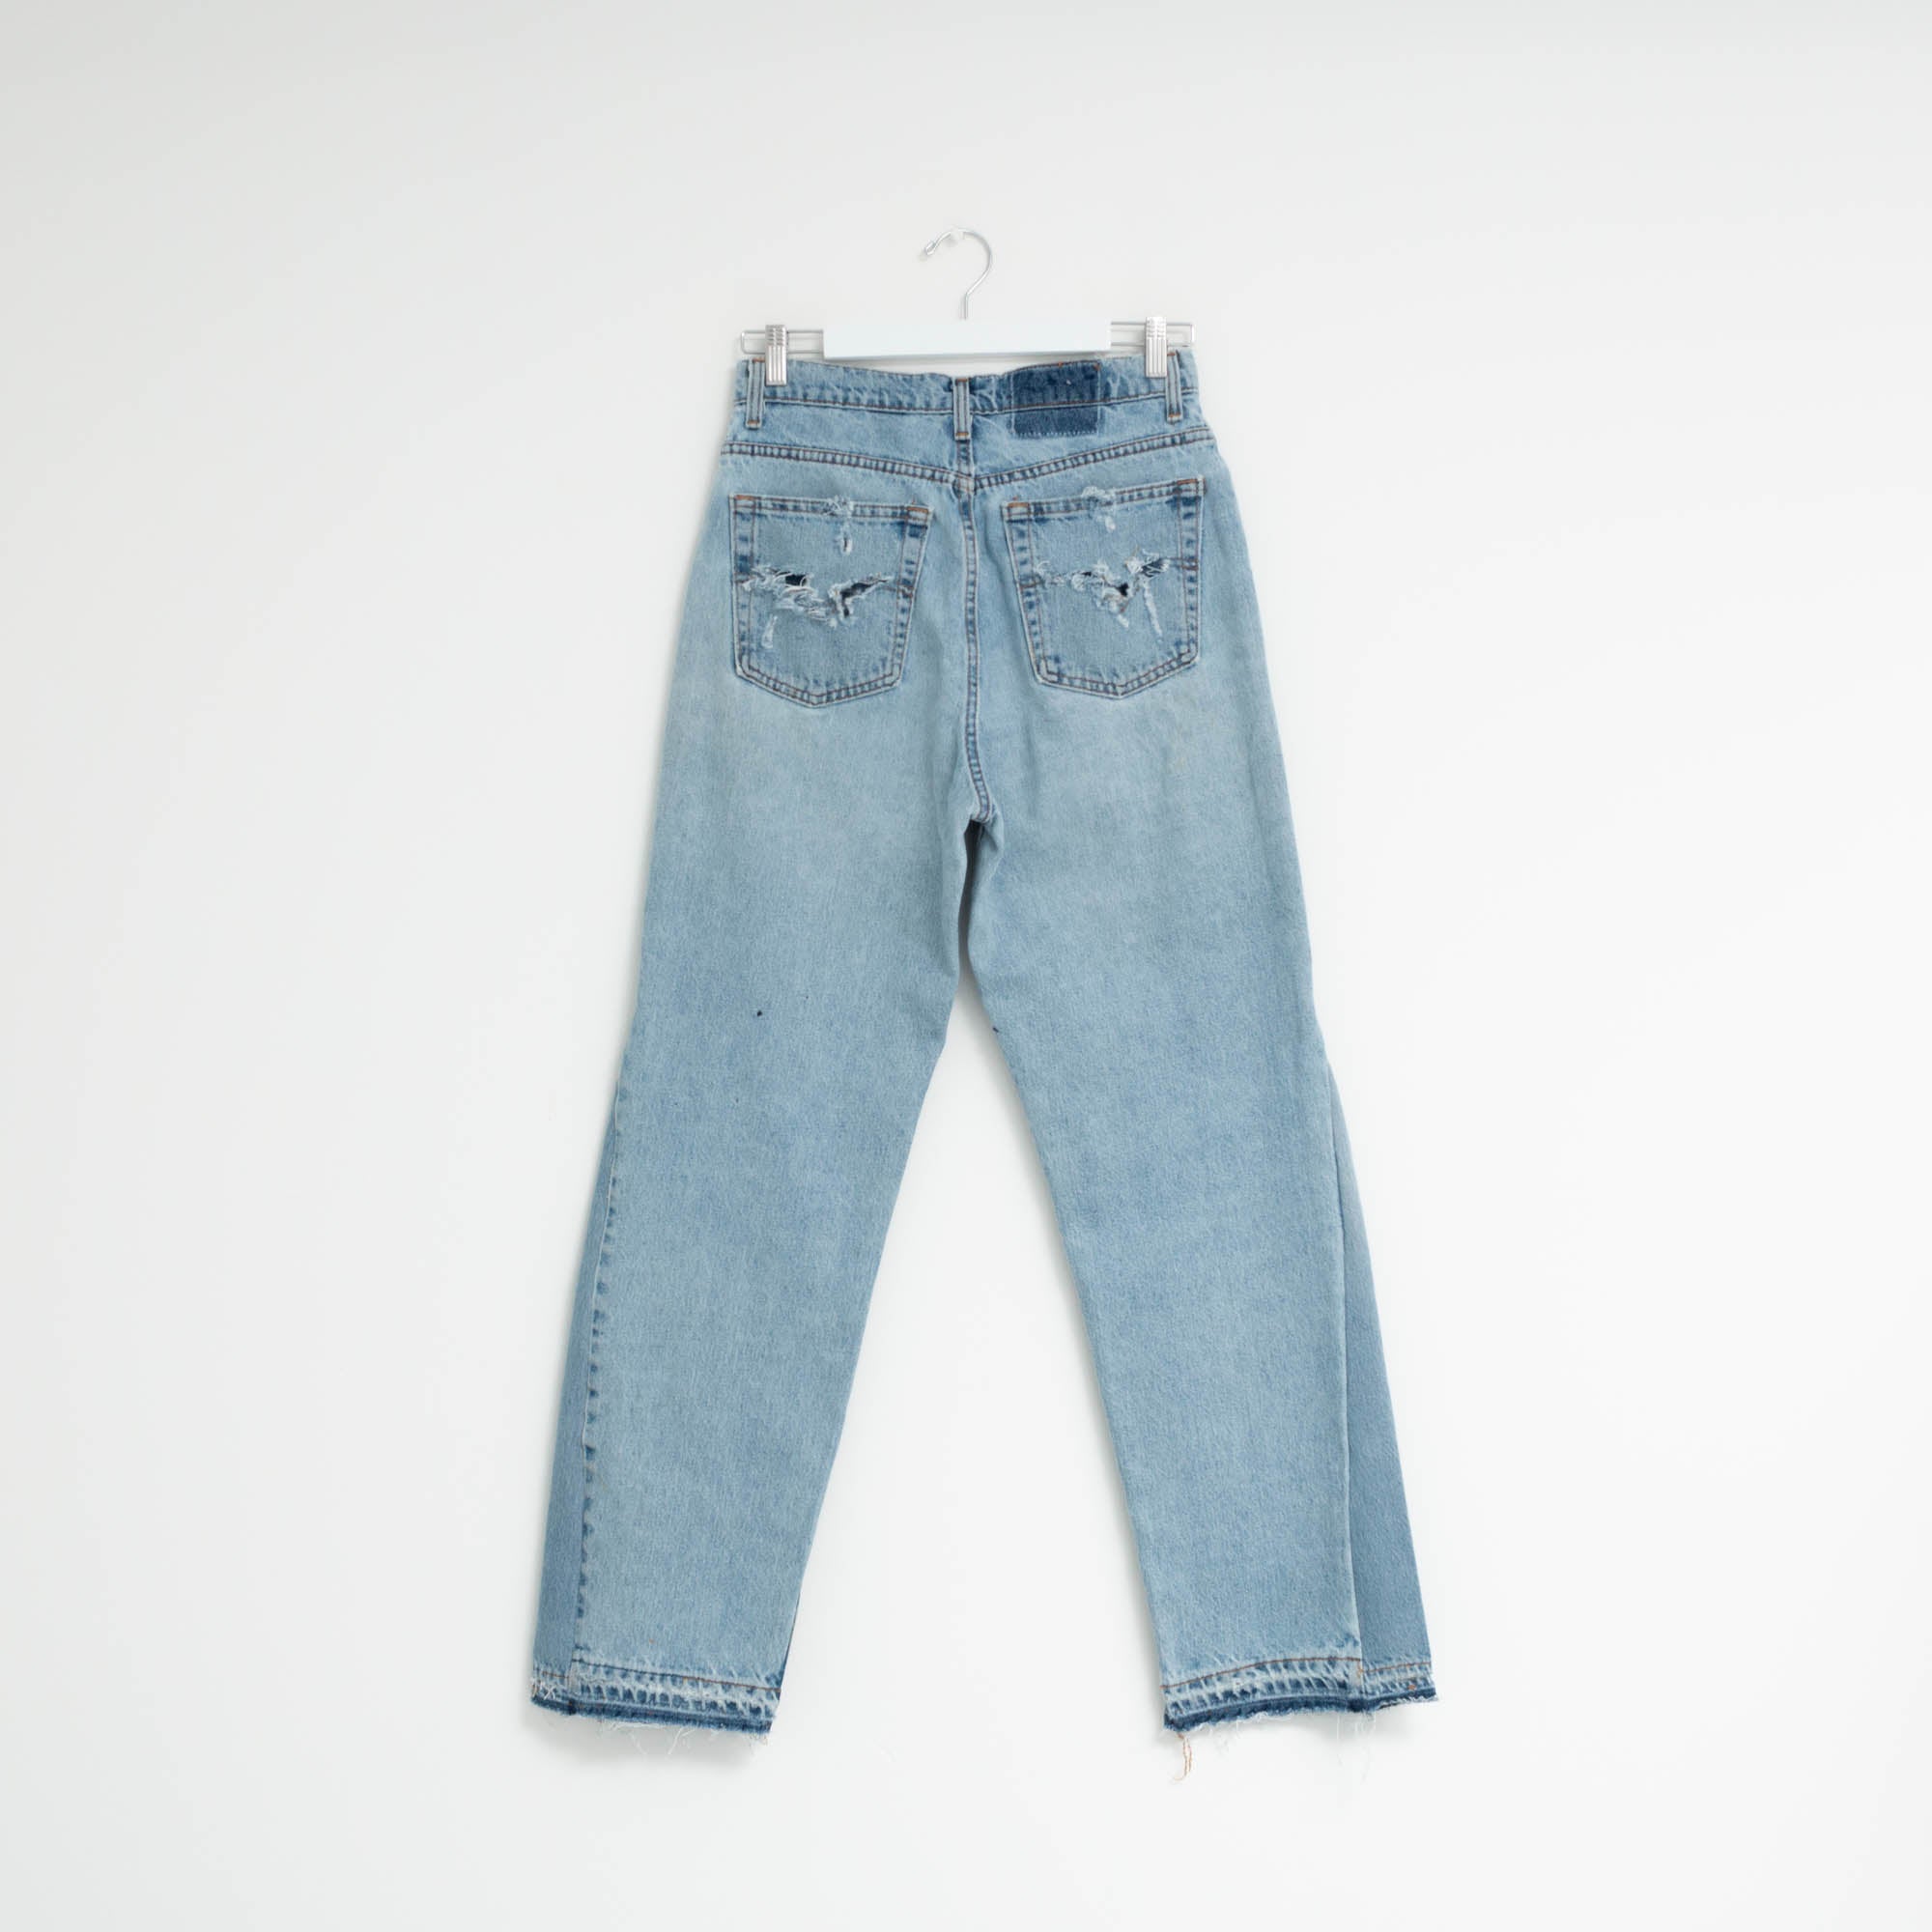 "FLARE" Jeans W30 L31